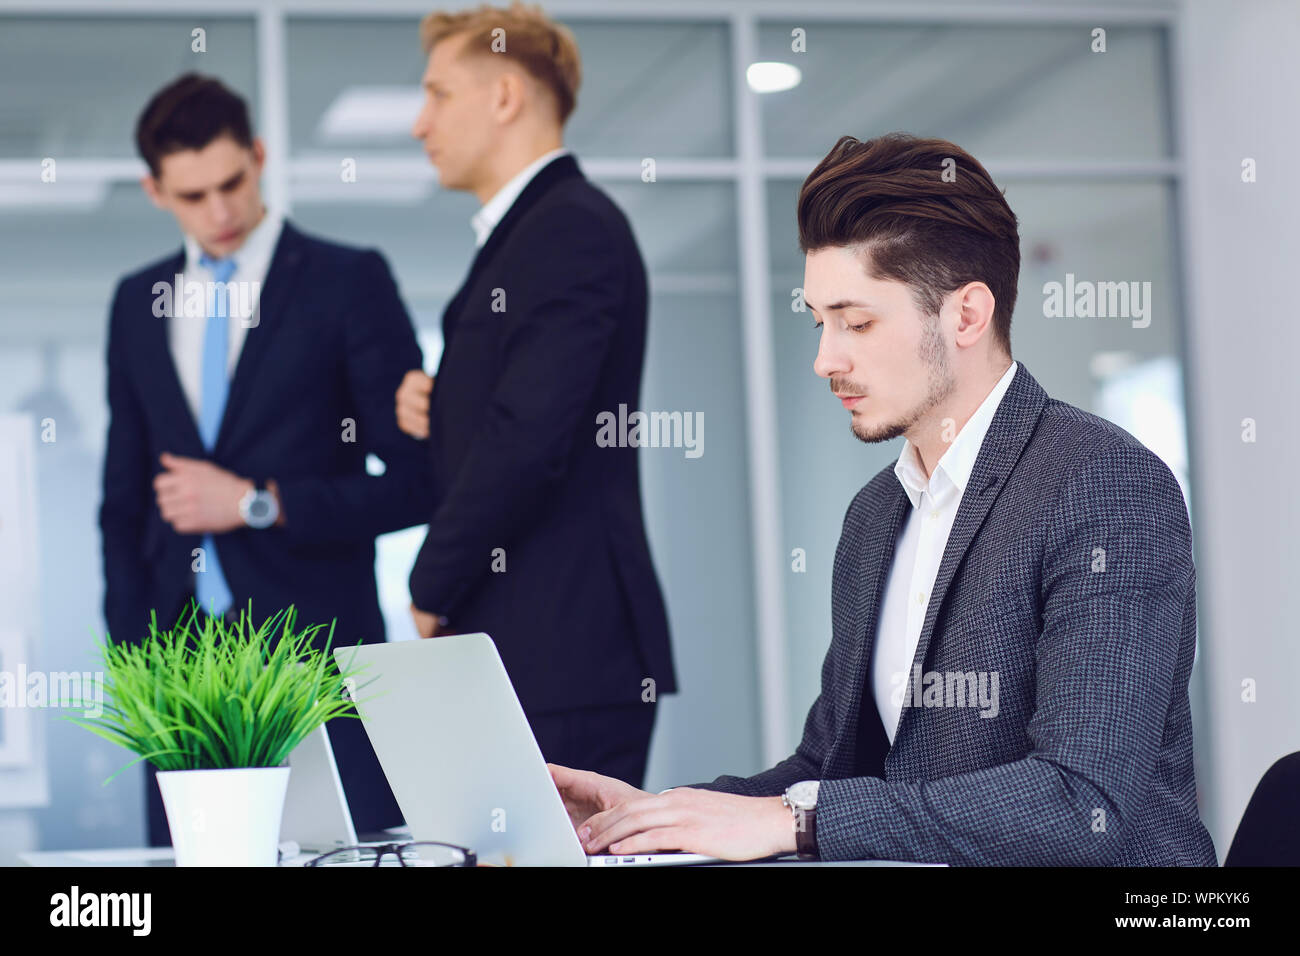 Serious young business people working at a table in an office. Stock Photo